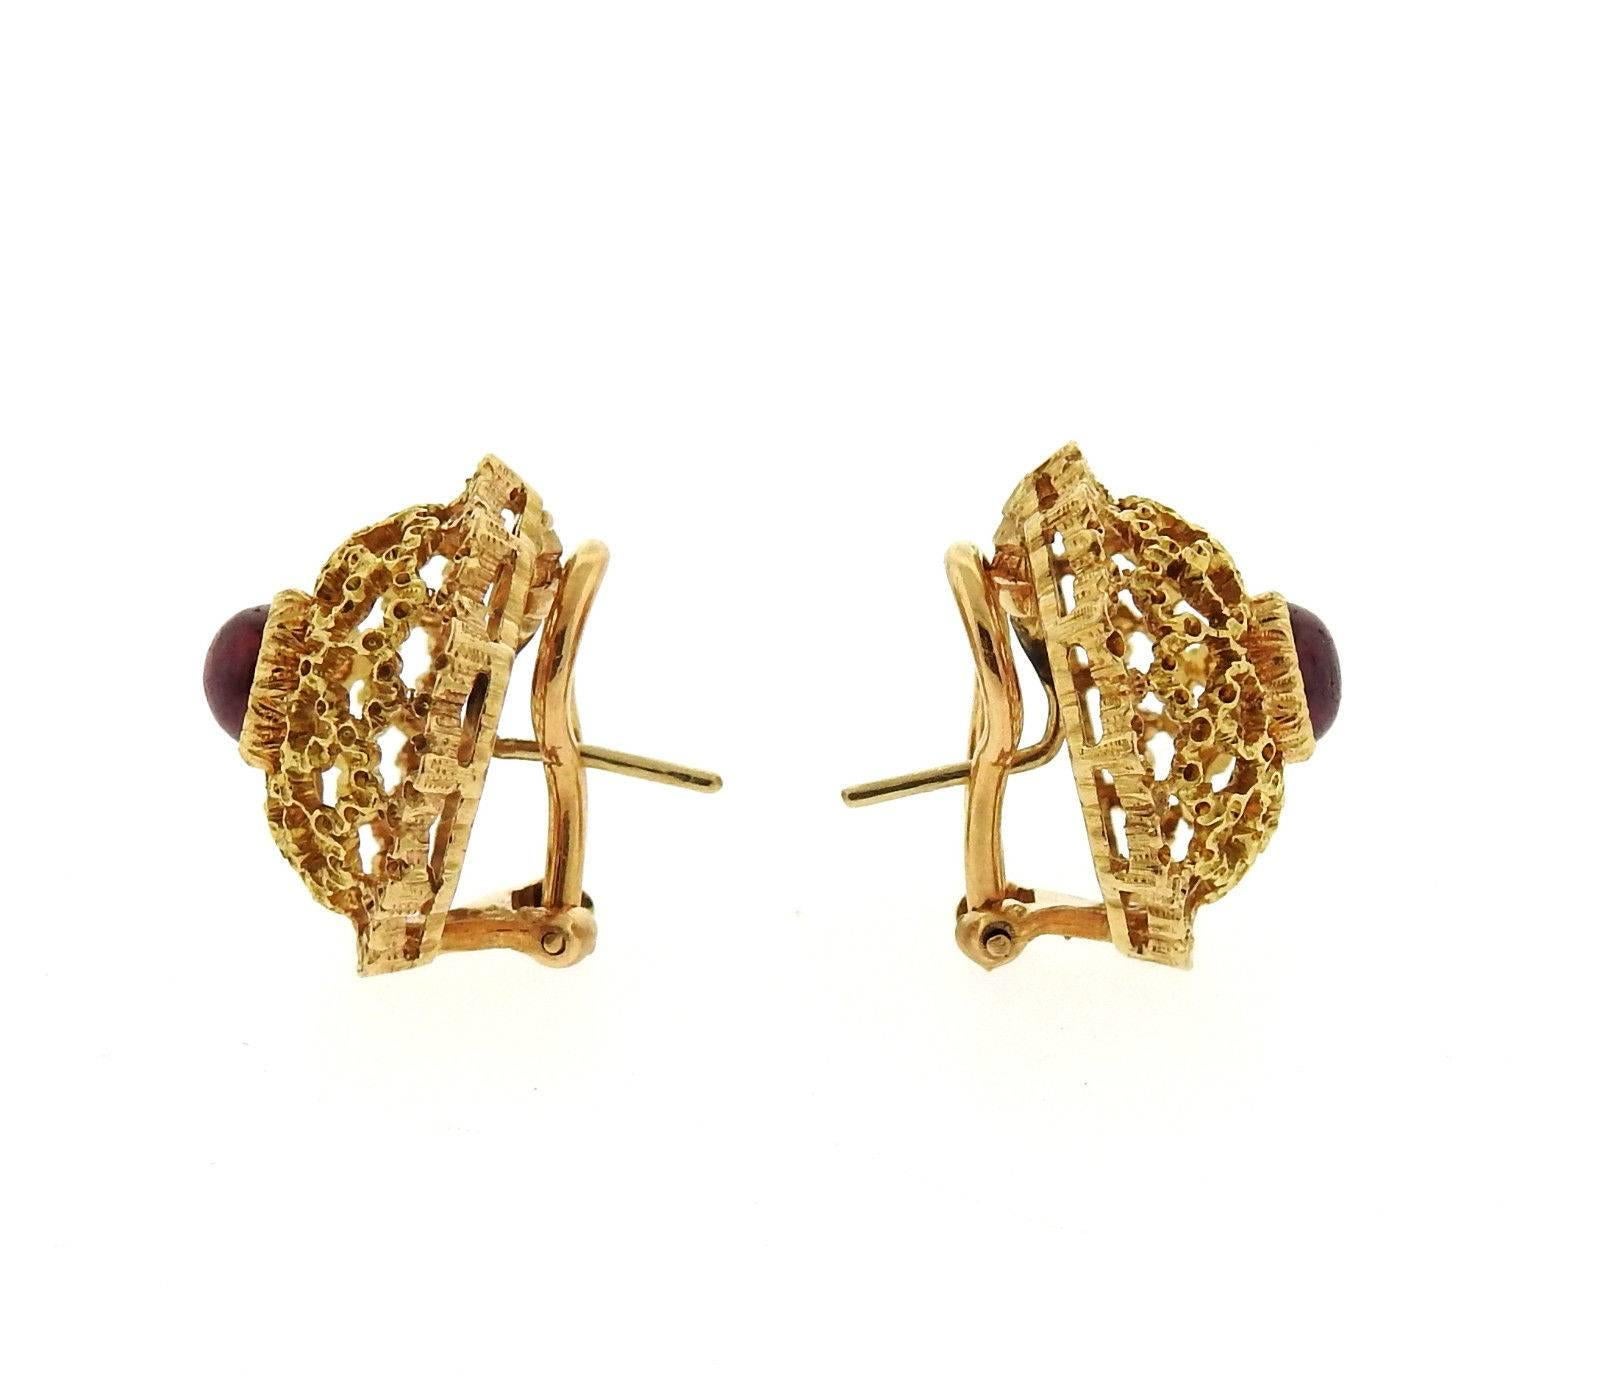 A pair of 18k yellow gold earrings set with 5mm ruby cabochons.  Earrings are 20mm in diameter and weigh 10.4 grams.  Marked: Buccellati, 18k, Italy. 